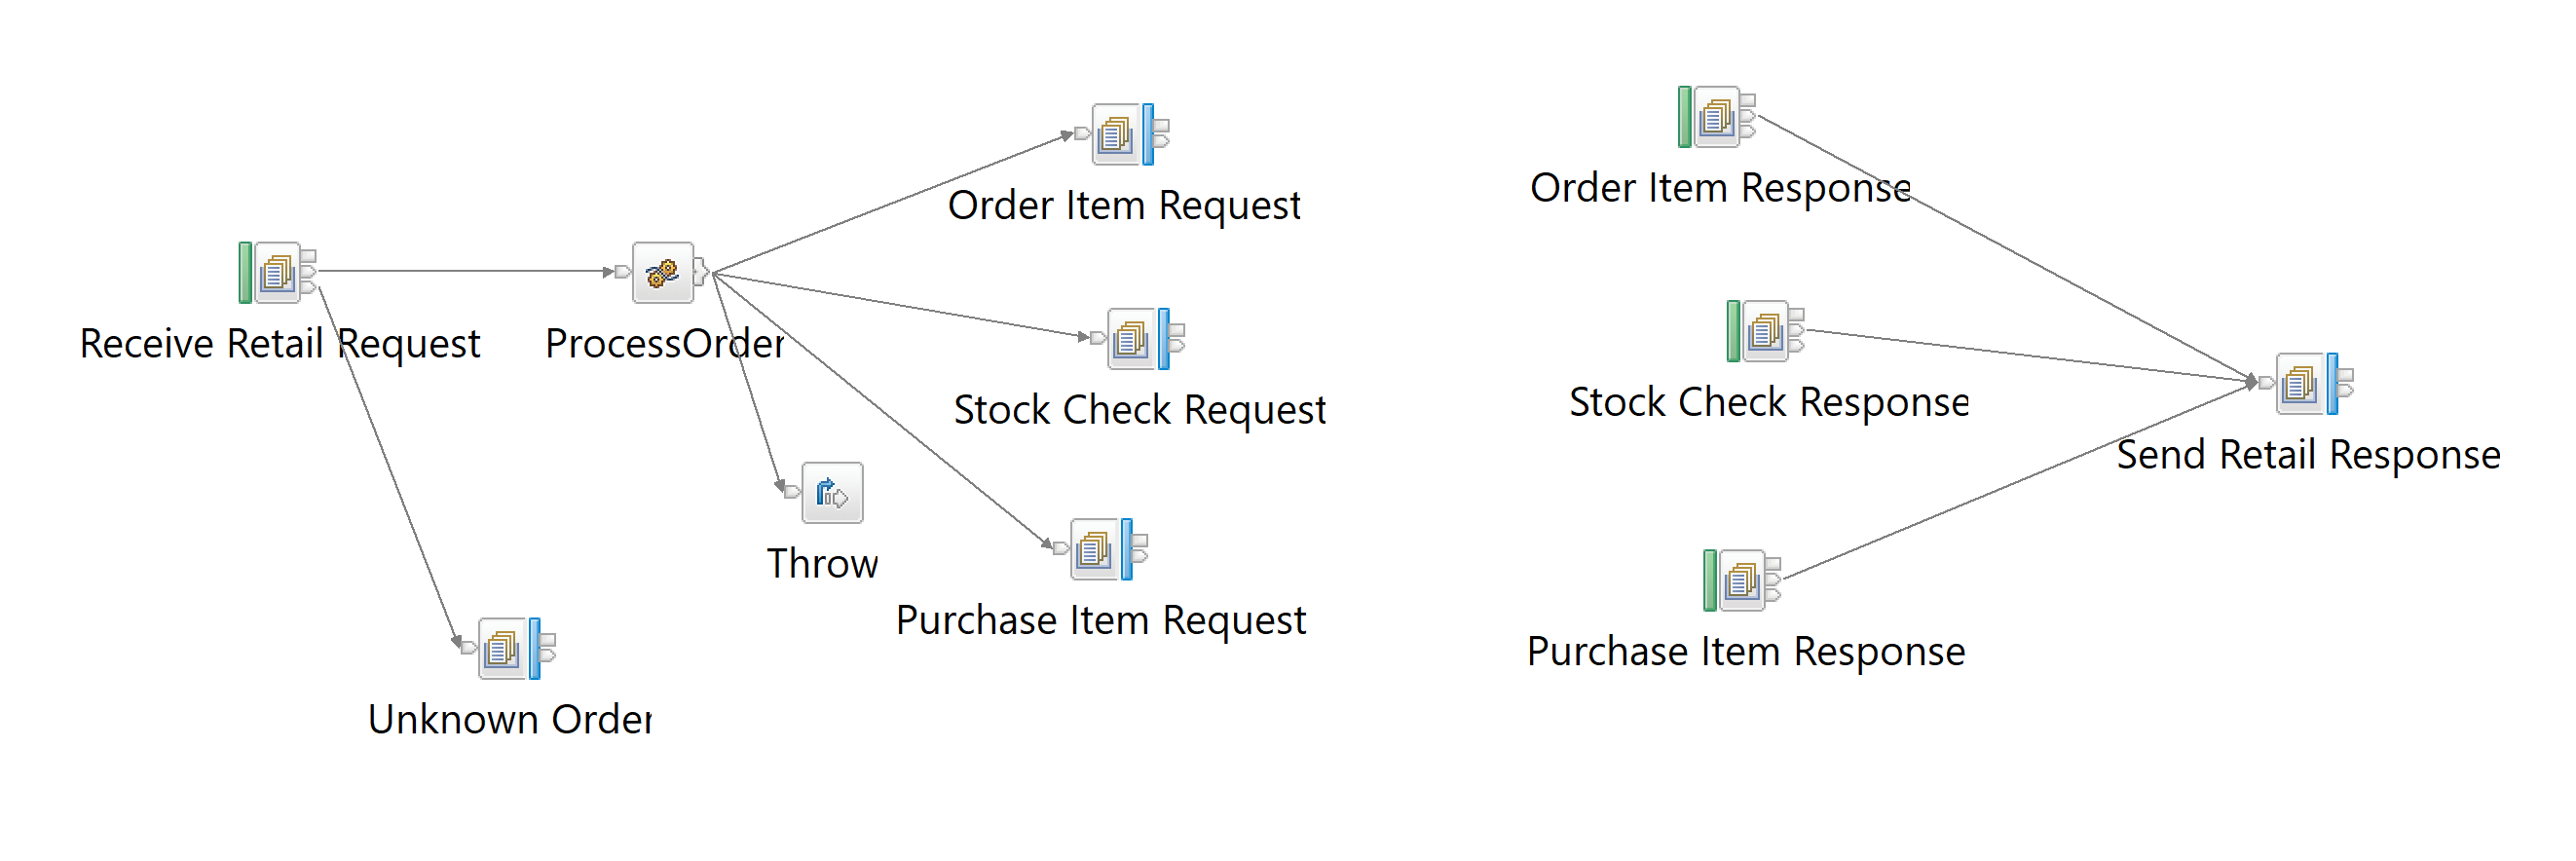 Retail example message flow in IIB with Throw node